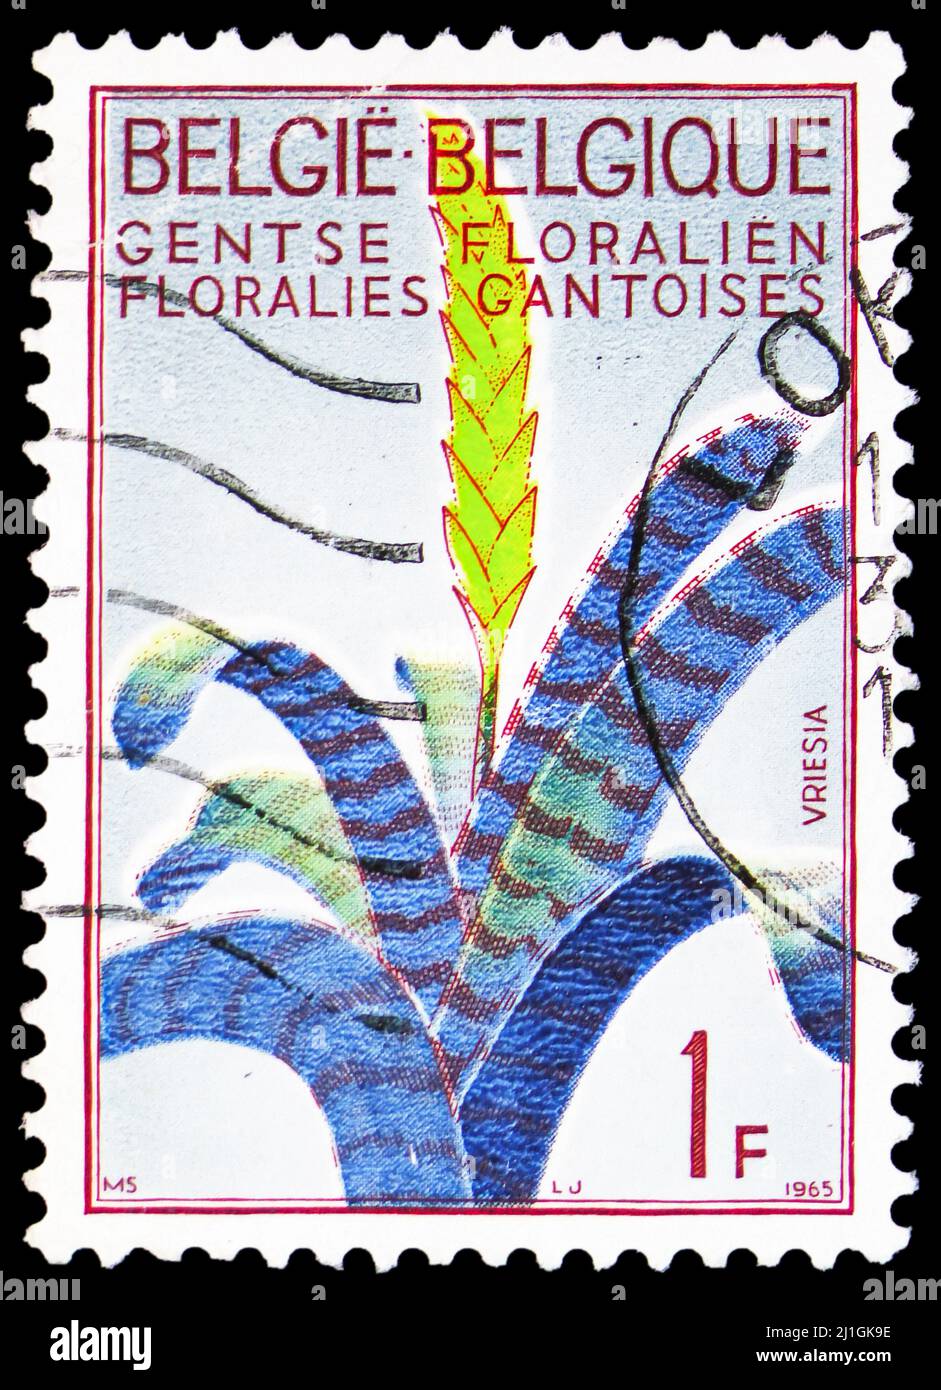 MOSCOW, RUSSIA - MARCH 10, 2022: Postage stamp printed in Belgium shows Flaming Sword (Vriesea splendens), Ghent Flower Show 1965 serie, circa Stock Photo